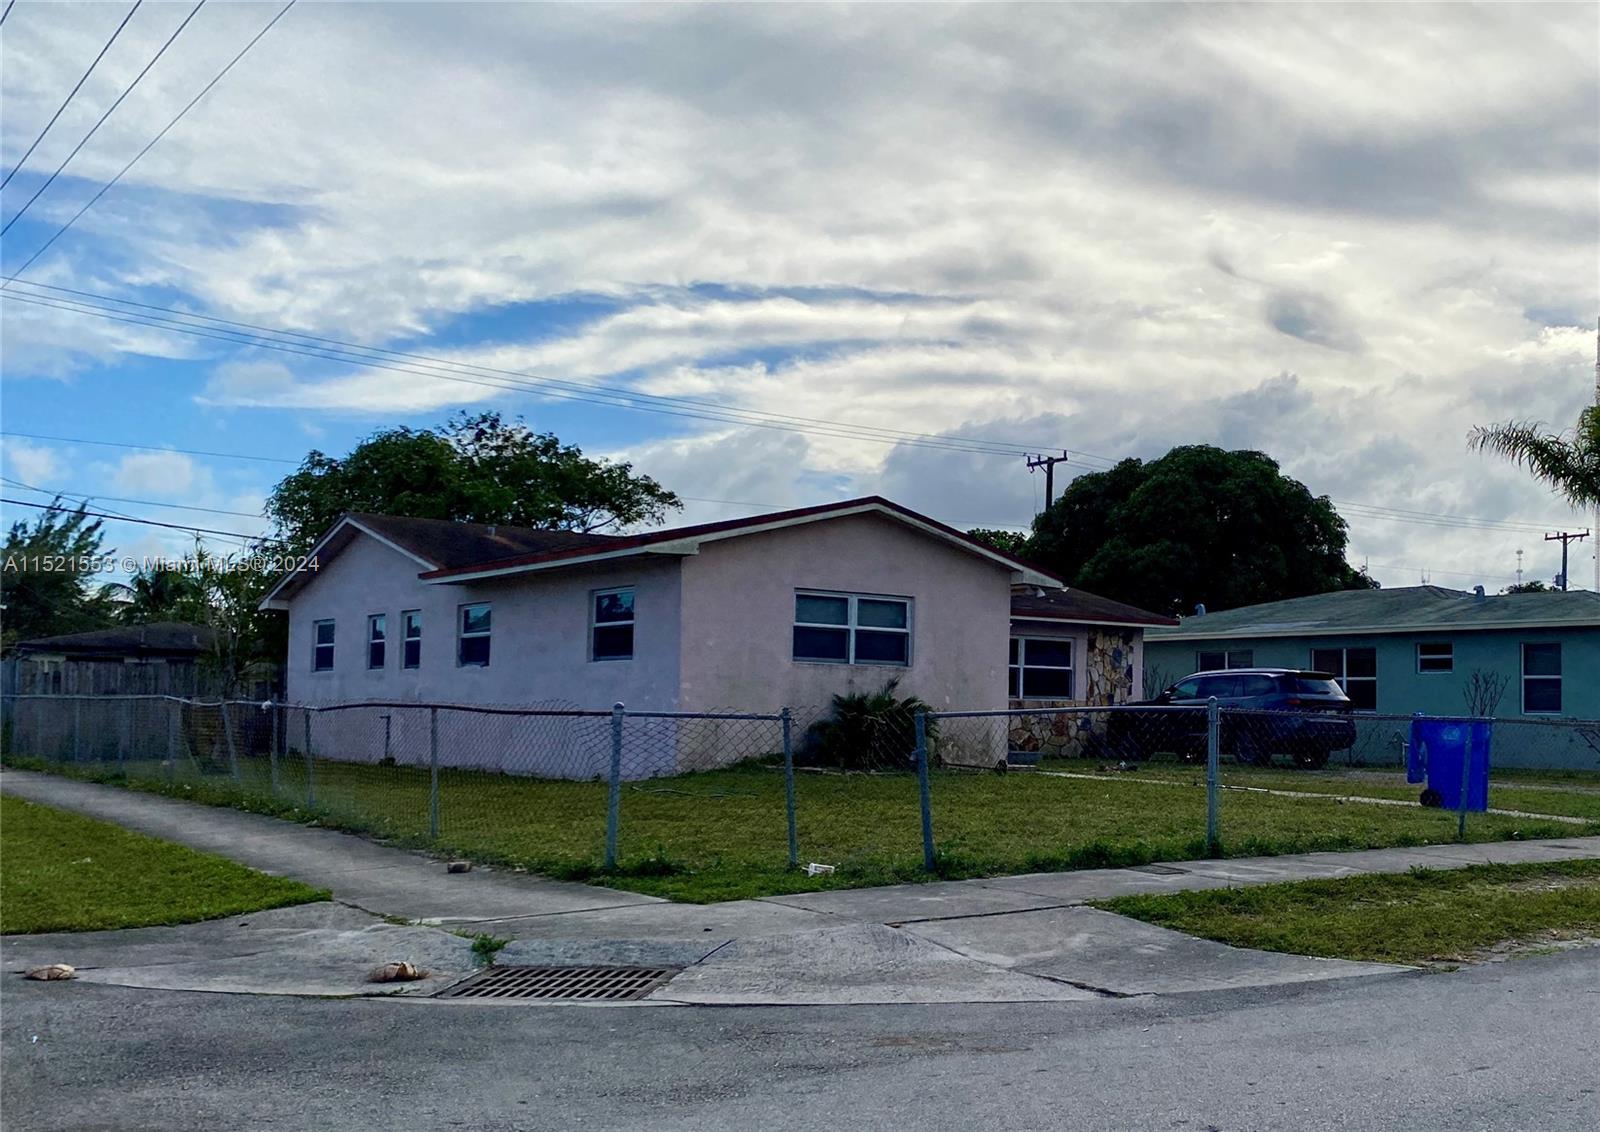 Address Not Disclosed, West Park, Broward County, Florida - 6 Bedrooms  
3 Bathrooms - 